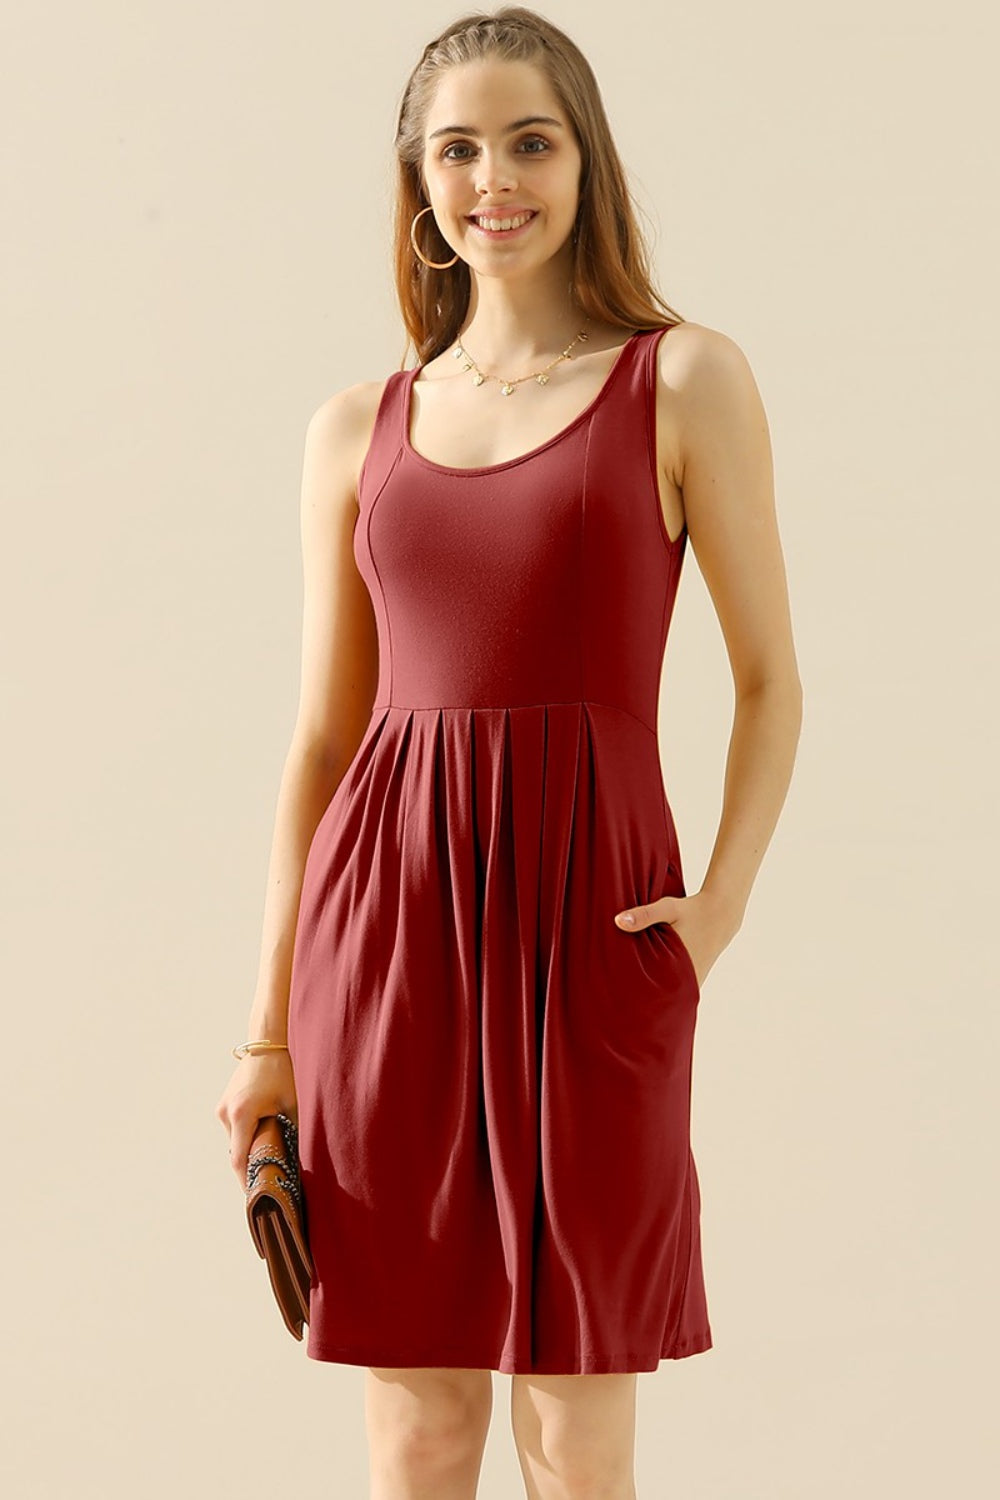 Doublju Full Size Round Neck Ruched Sleeveless Dress with Pockets - Tophatter Deals